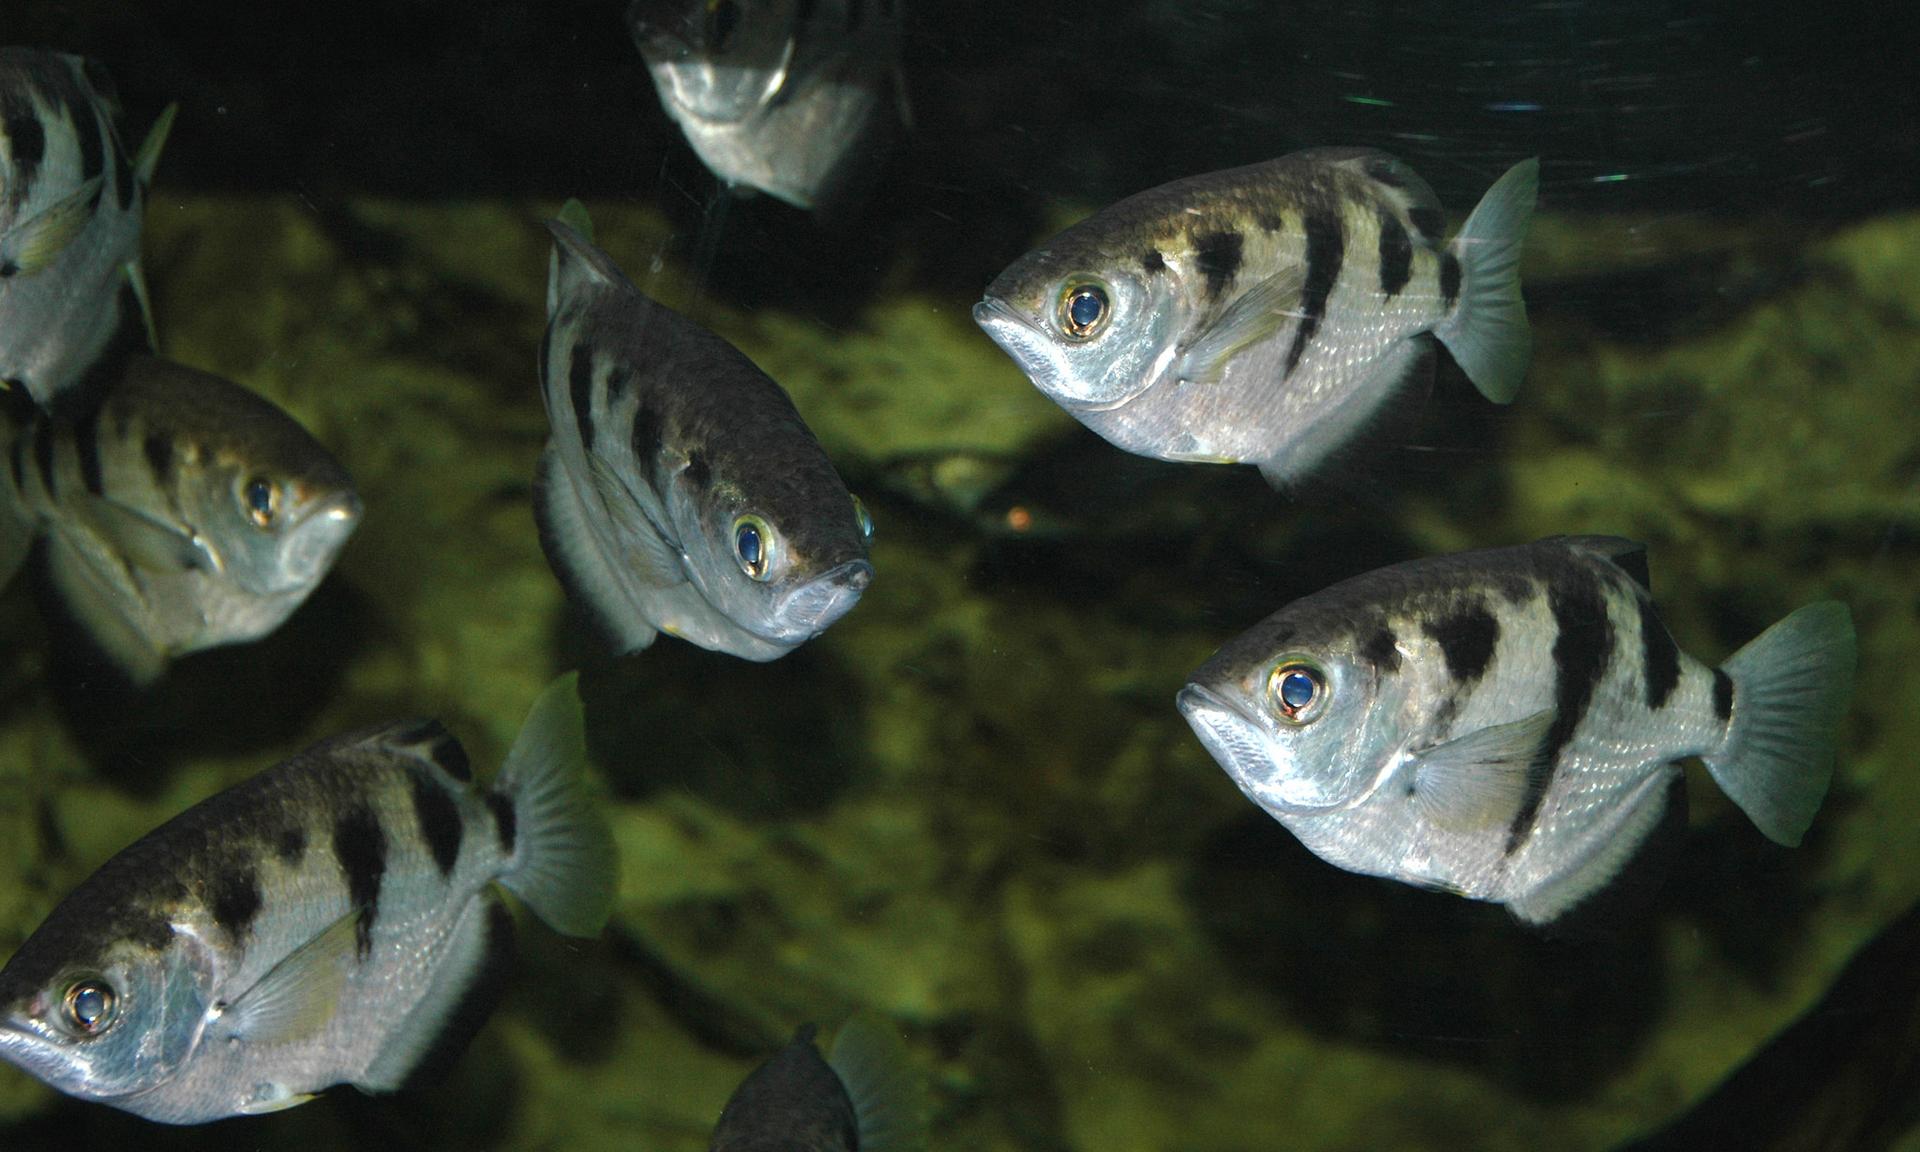 The mostly brackish-water archerfish is famous for its ability to shoot narrow streams of water from its mouth.